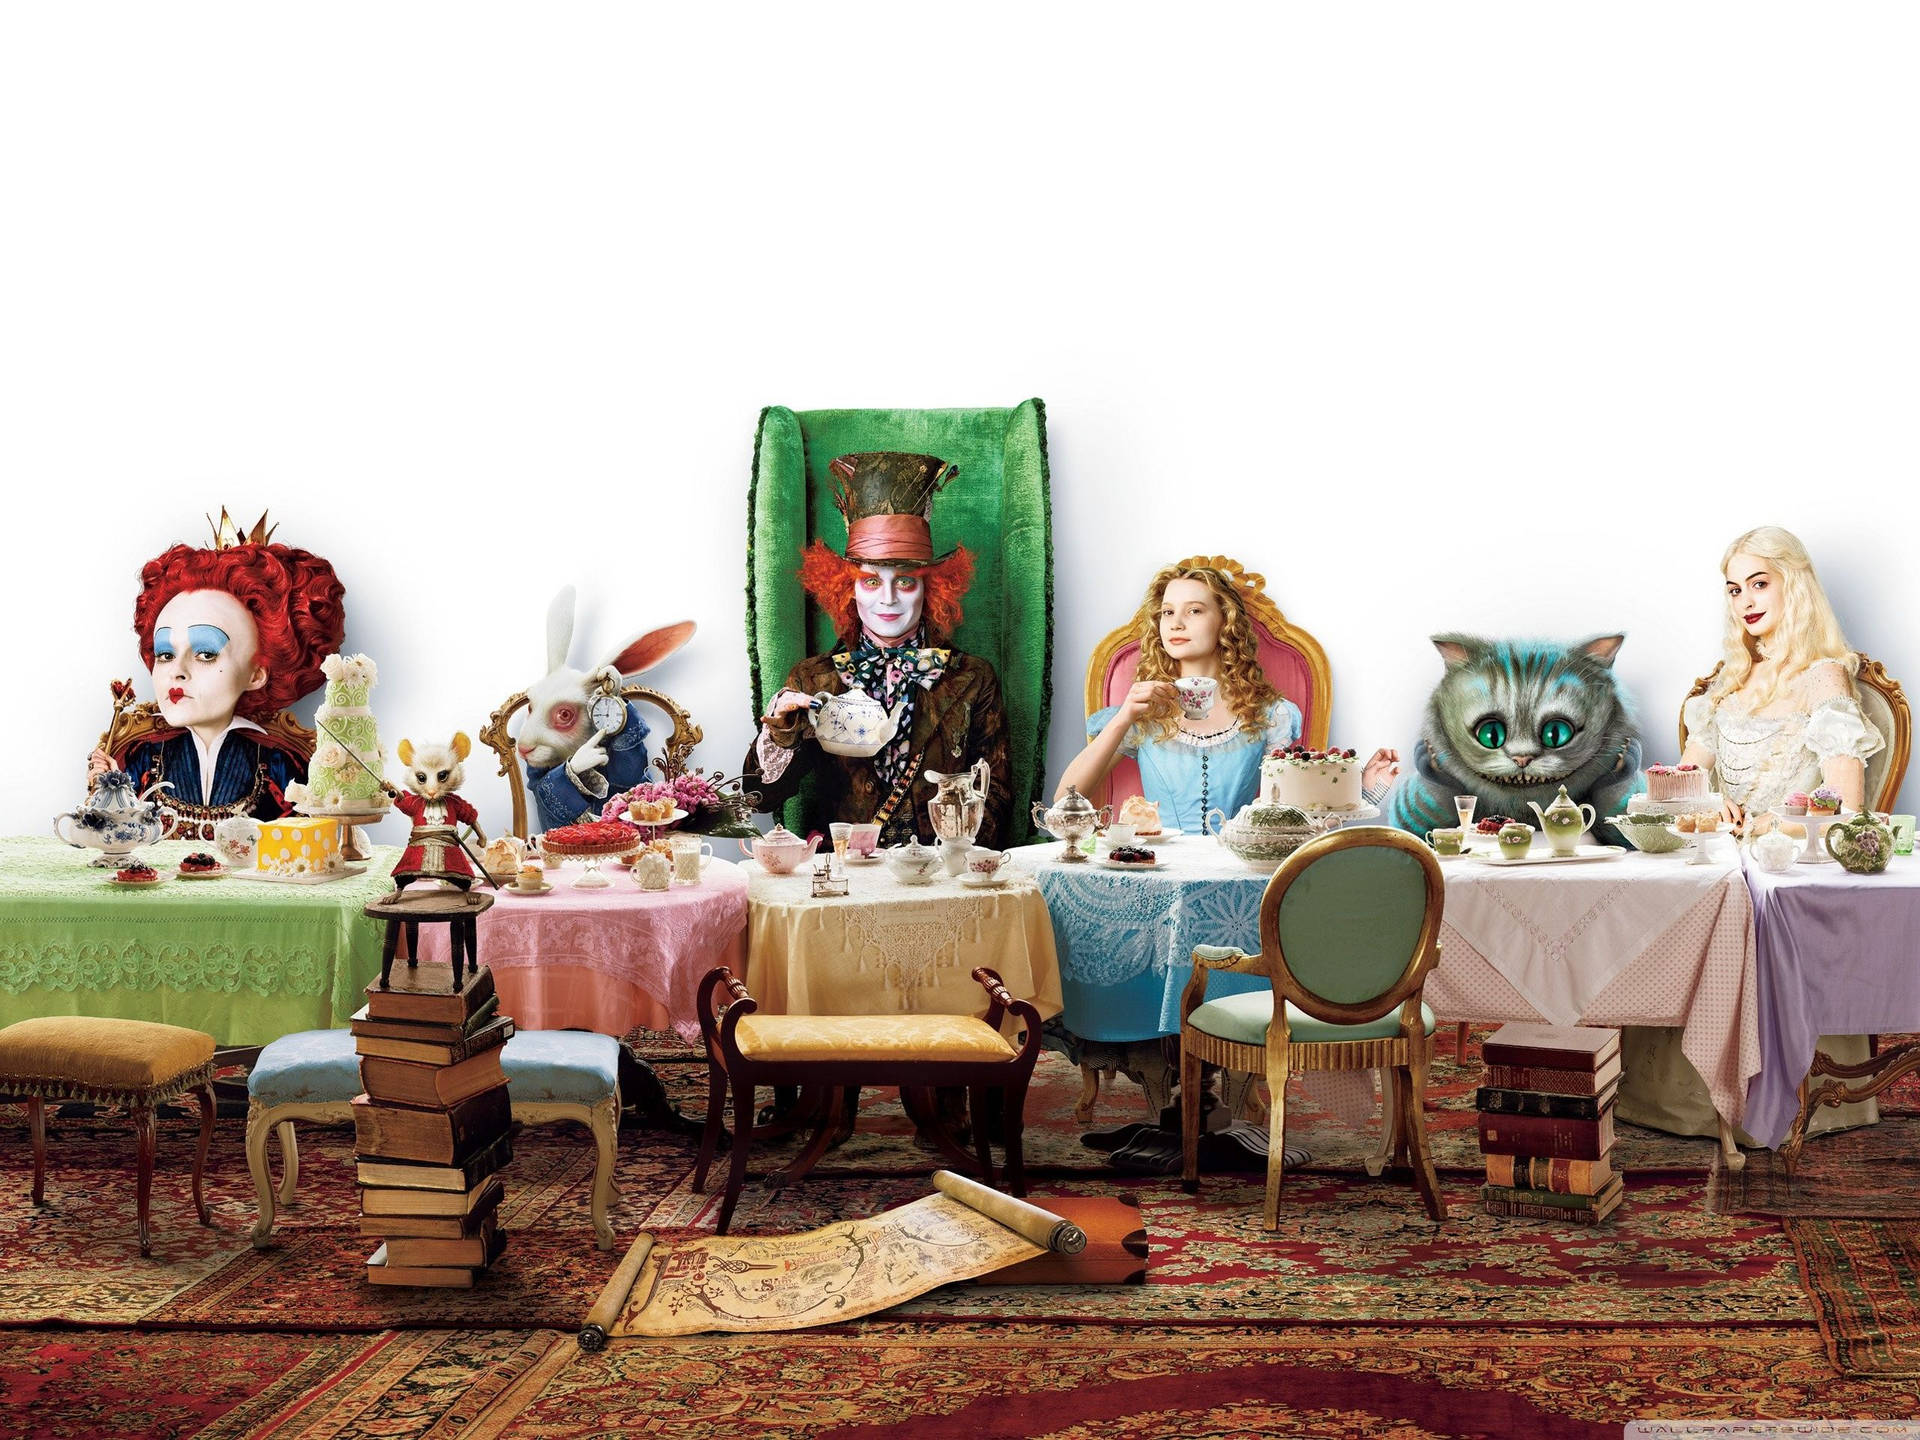 Mad Hatter hosting a mad tea party with Alice In Wonderland. Wallpaper